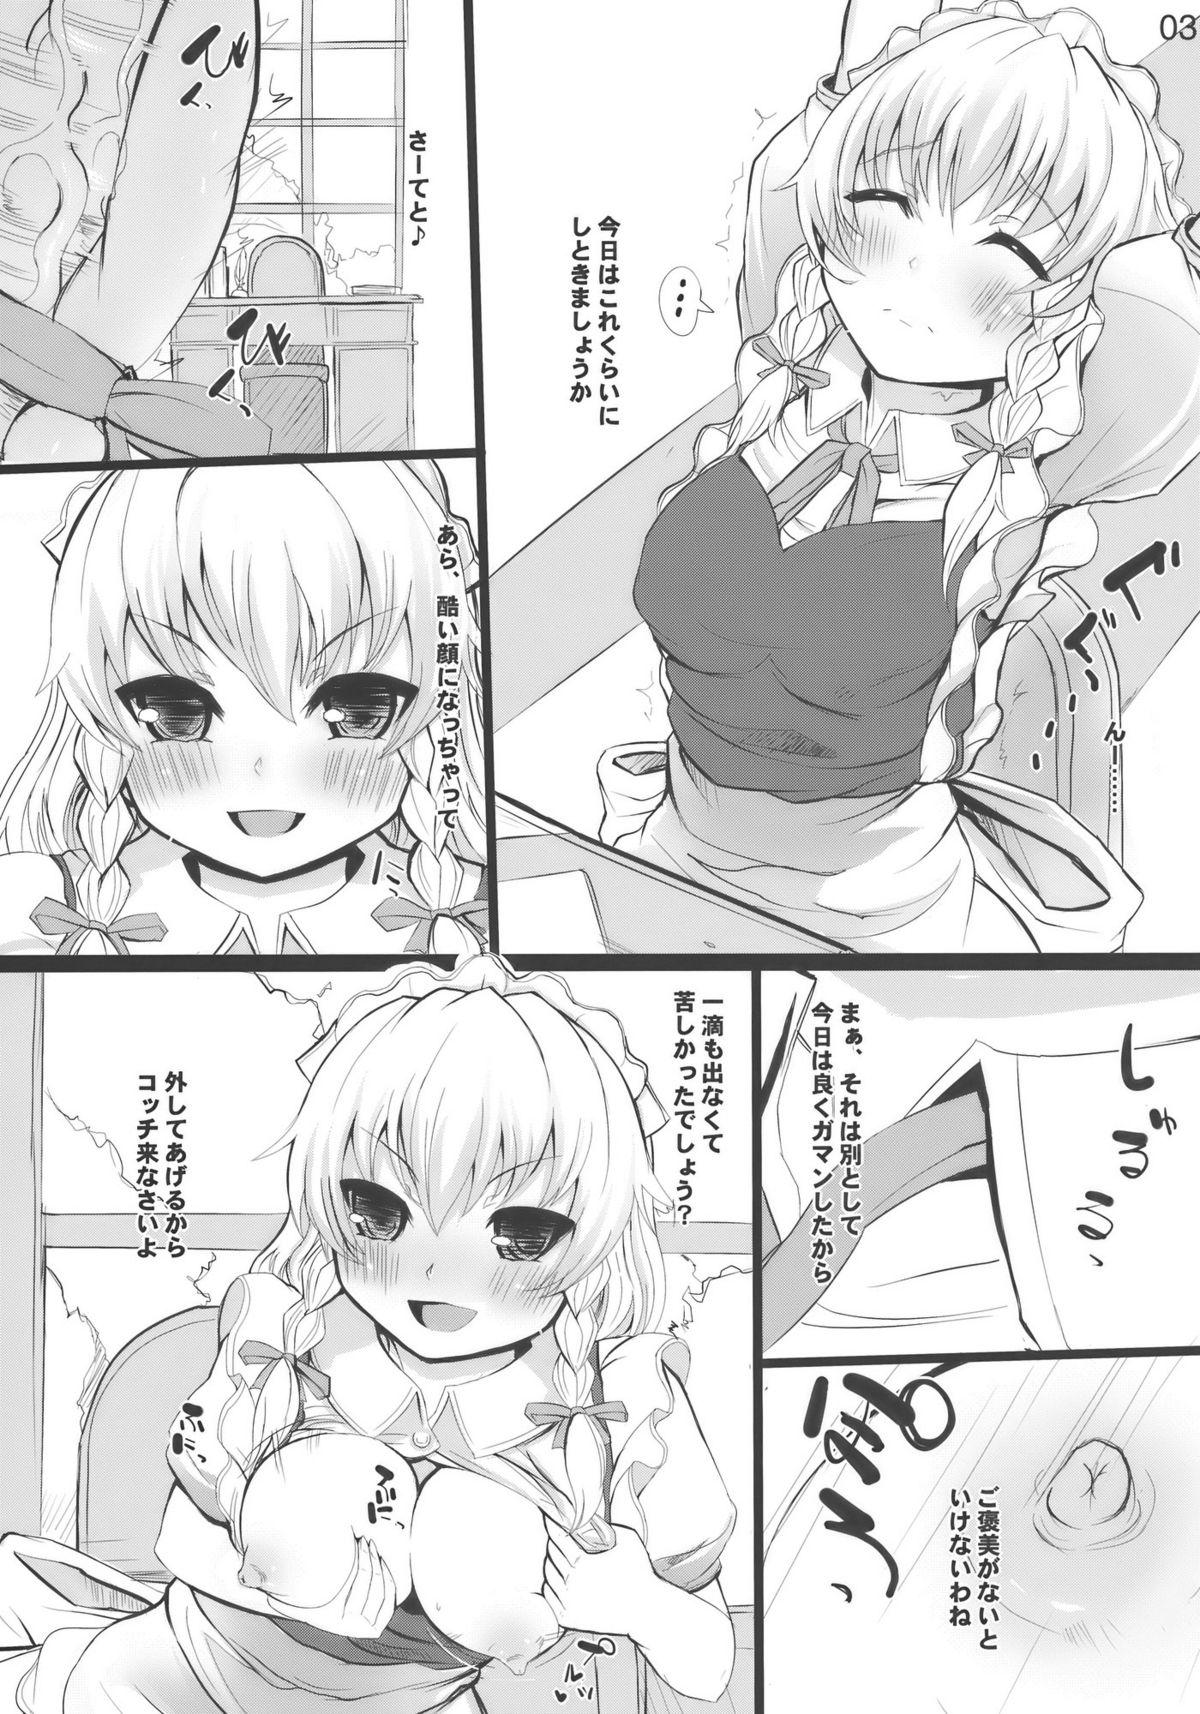 Bigcock Feed me with your Kiss - Touhou project Lesbians - Page 3